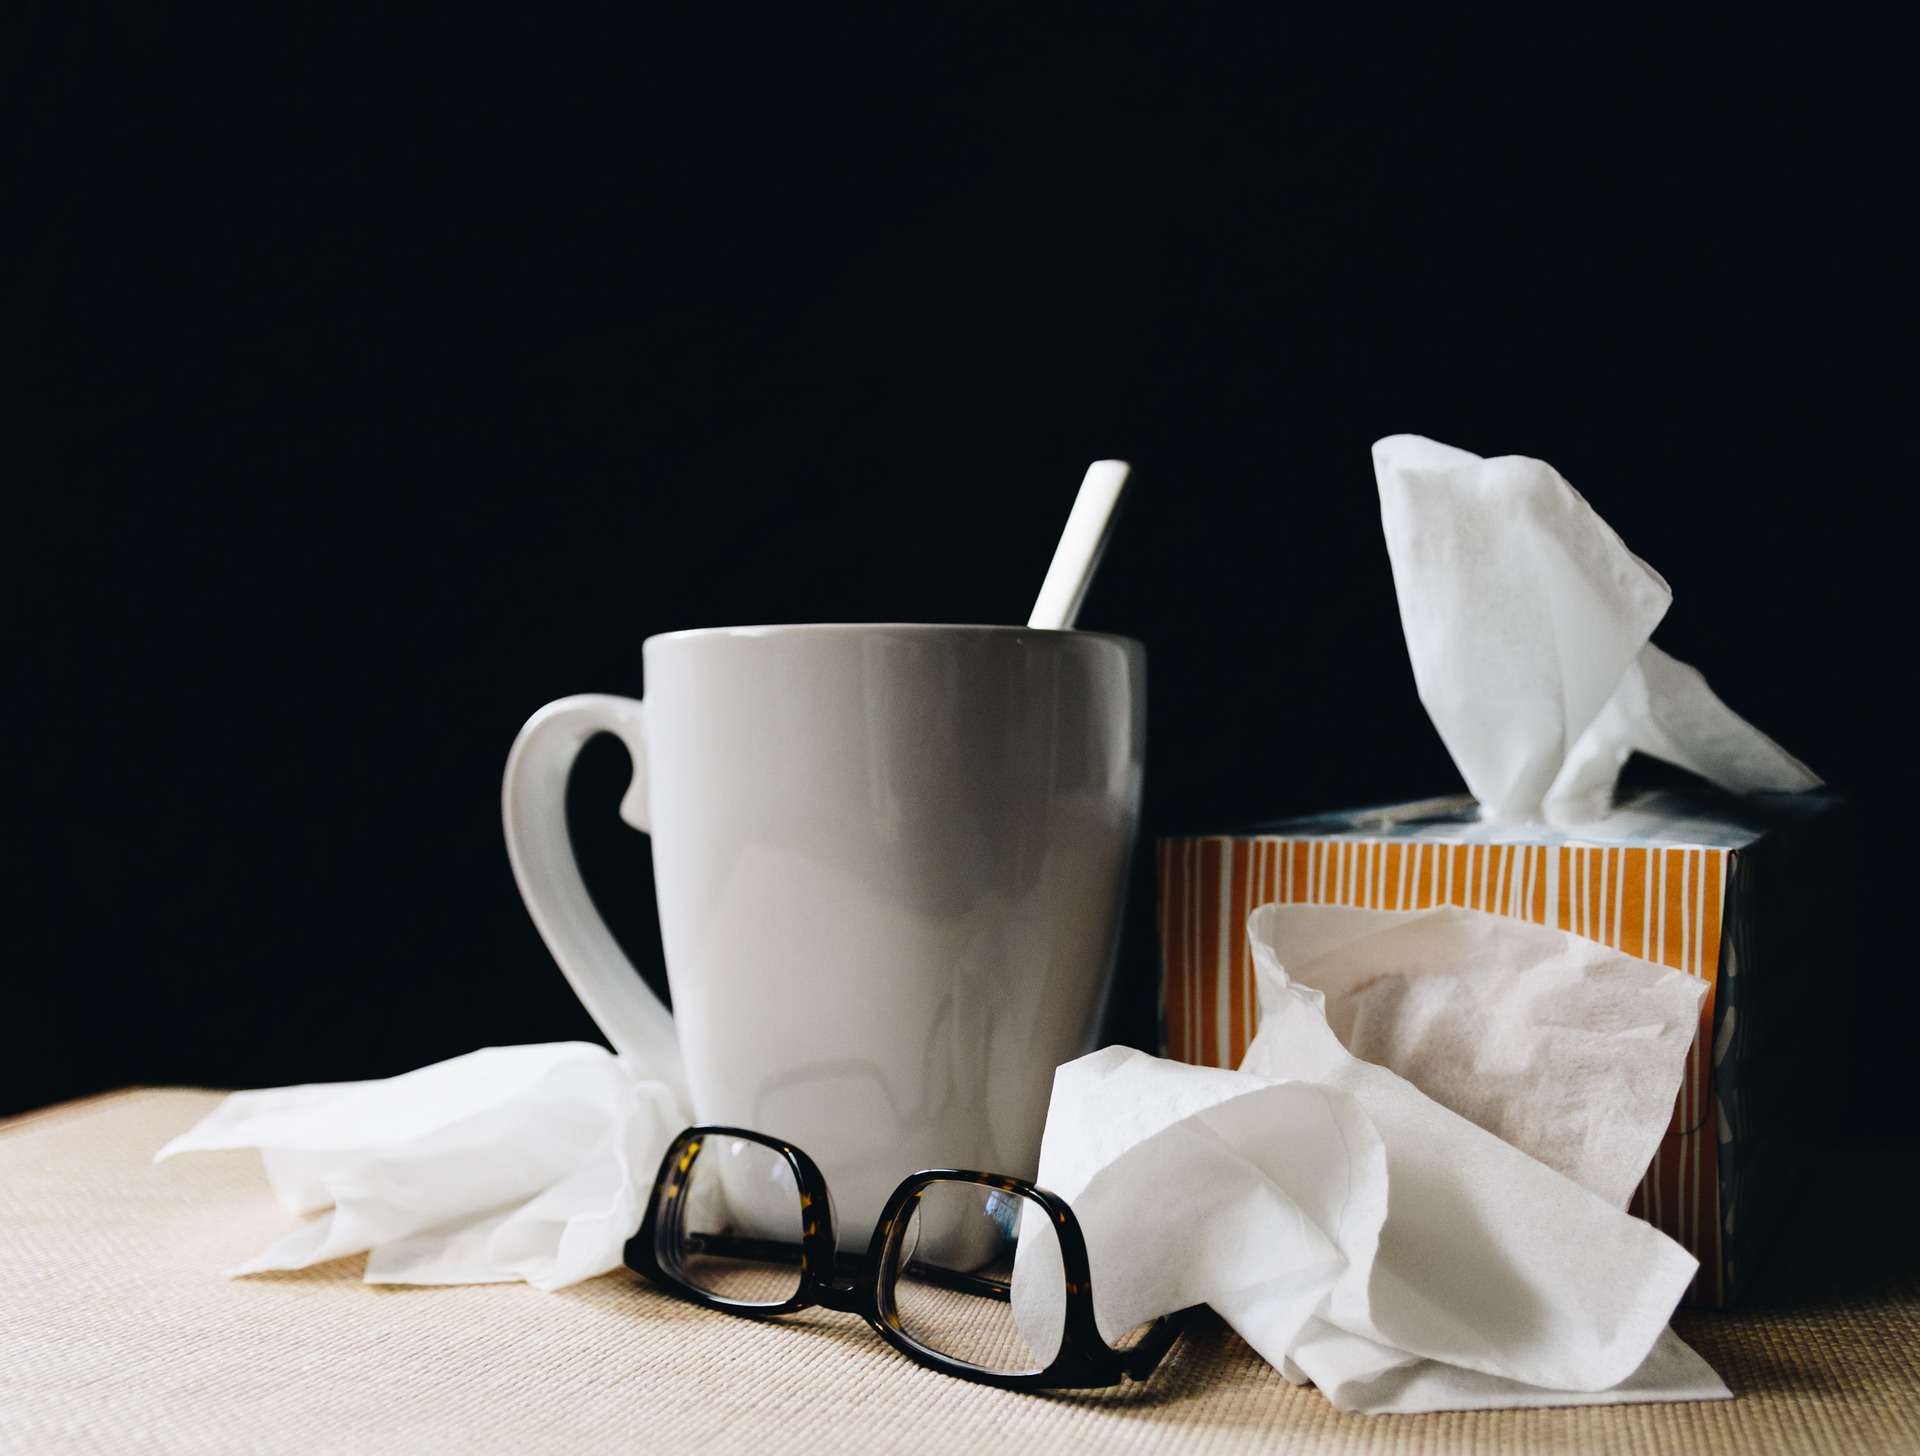 A mug, glasses, and tissues on a table